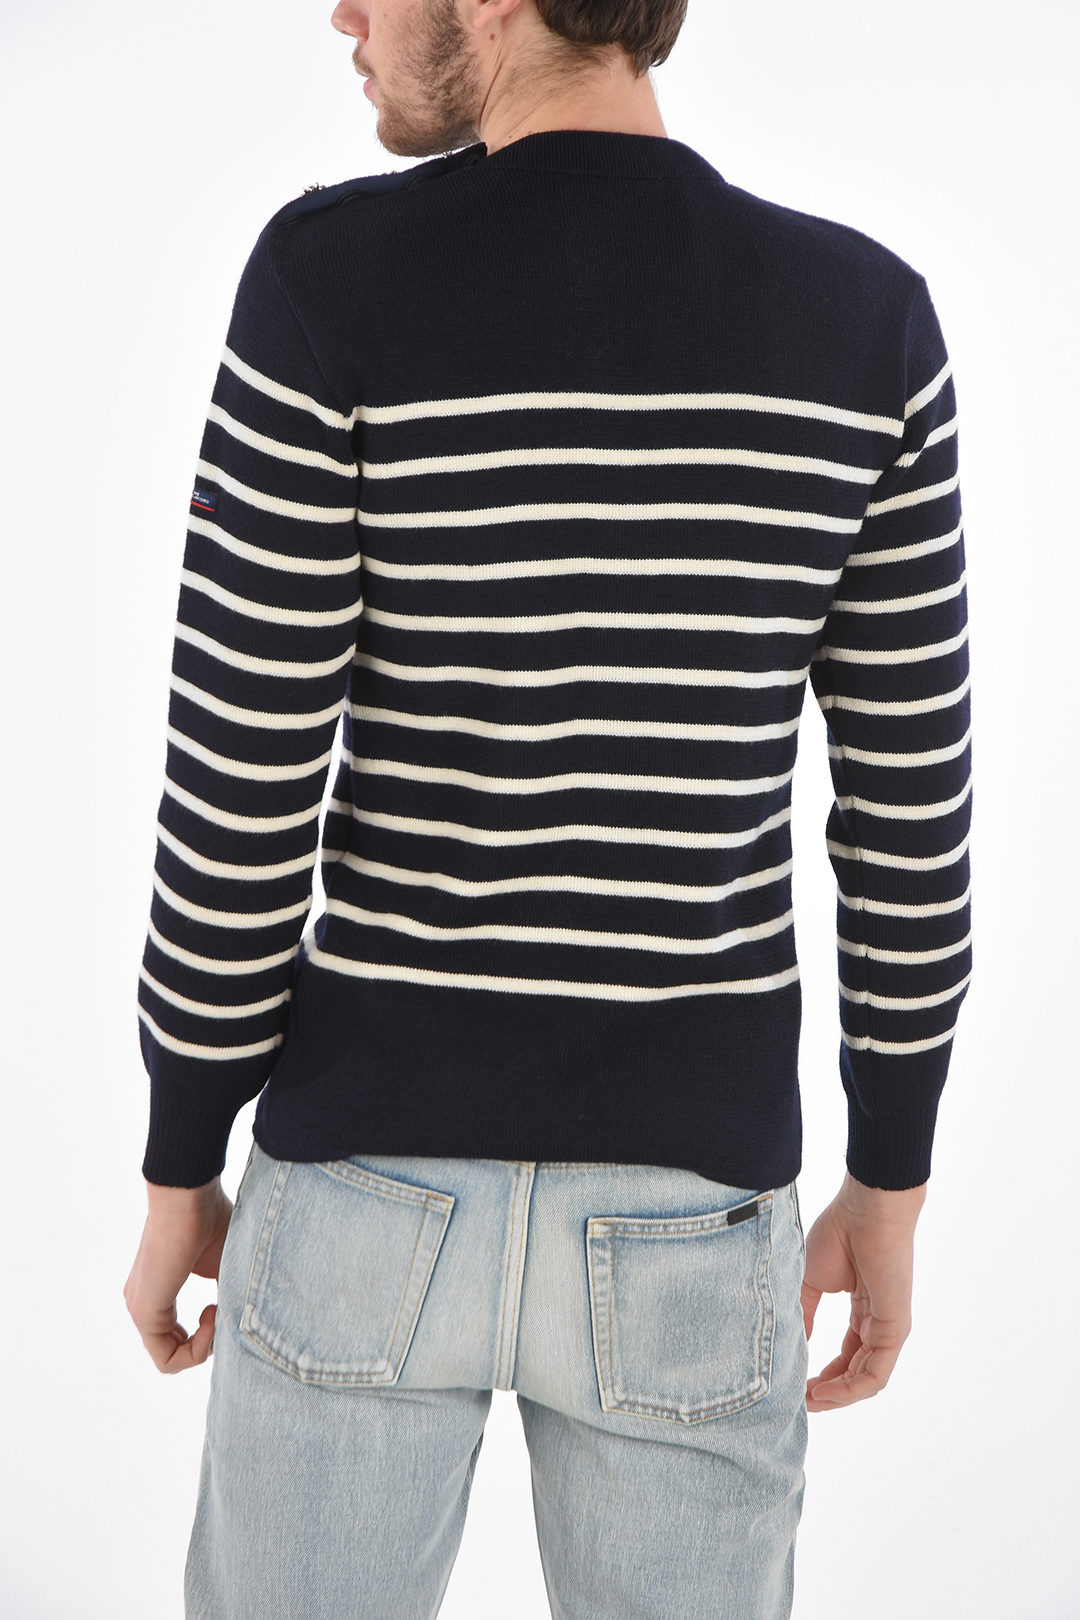 ARMOR LUX X THE BRETON awning striped crew-neck sweater with jewel